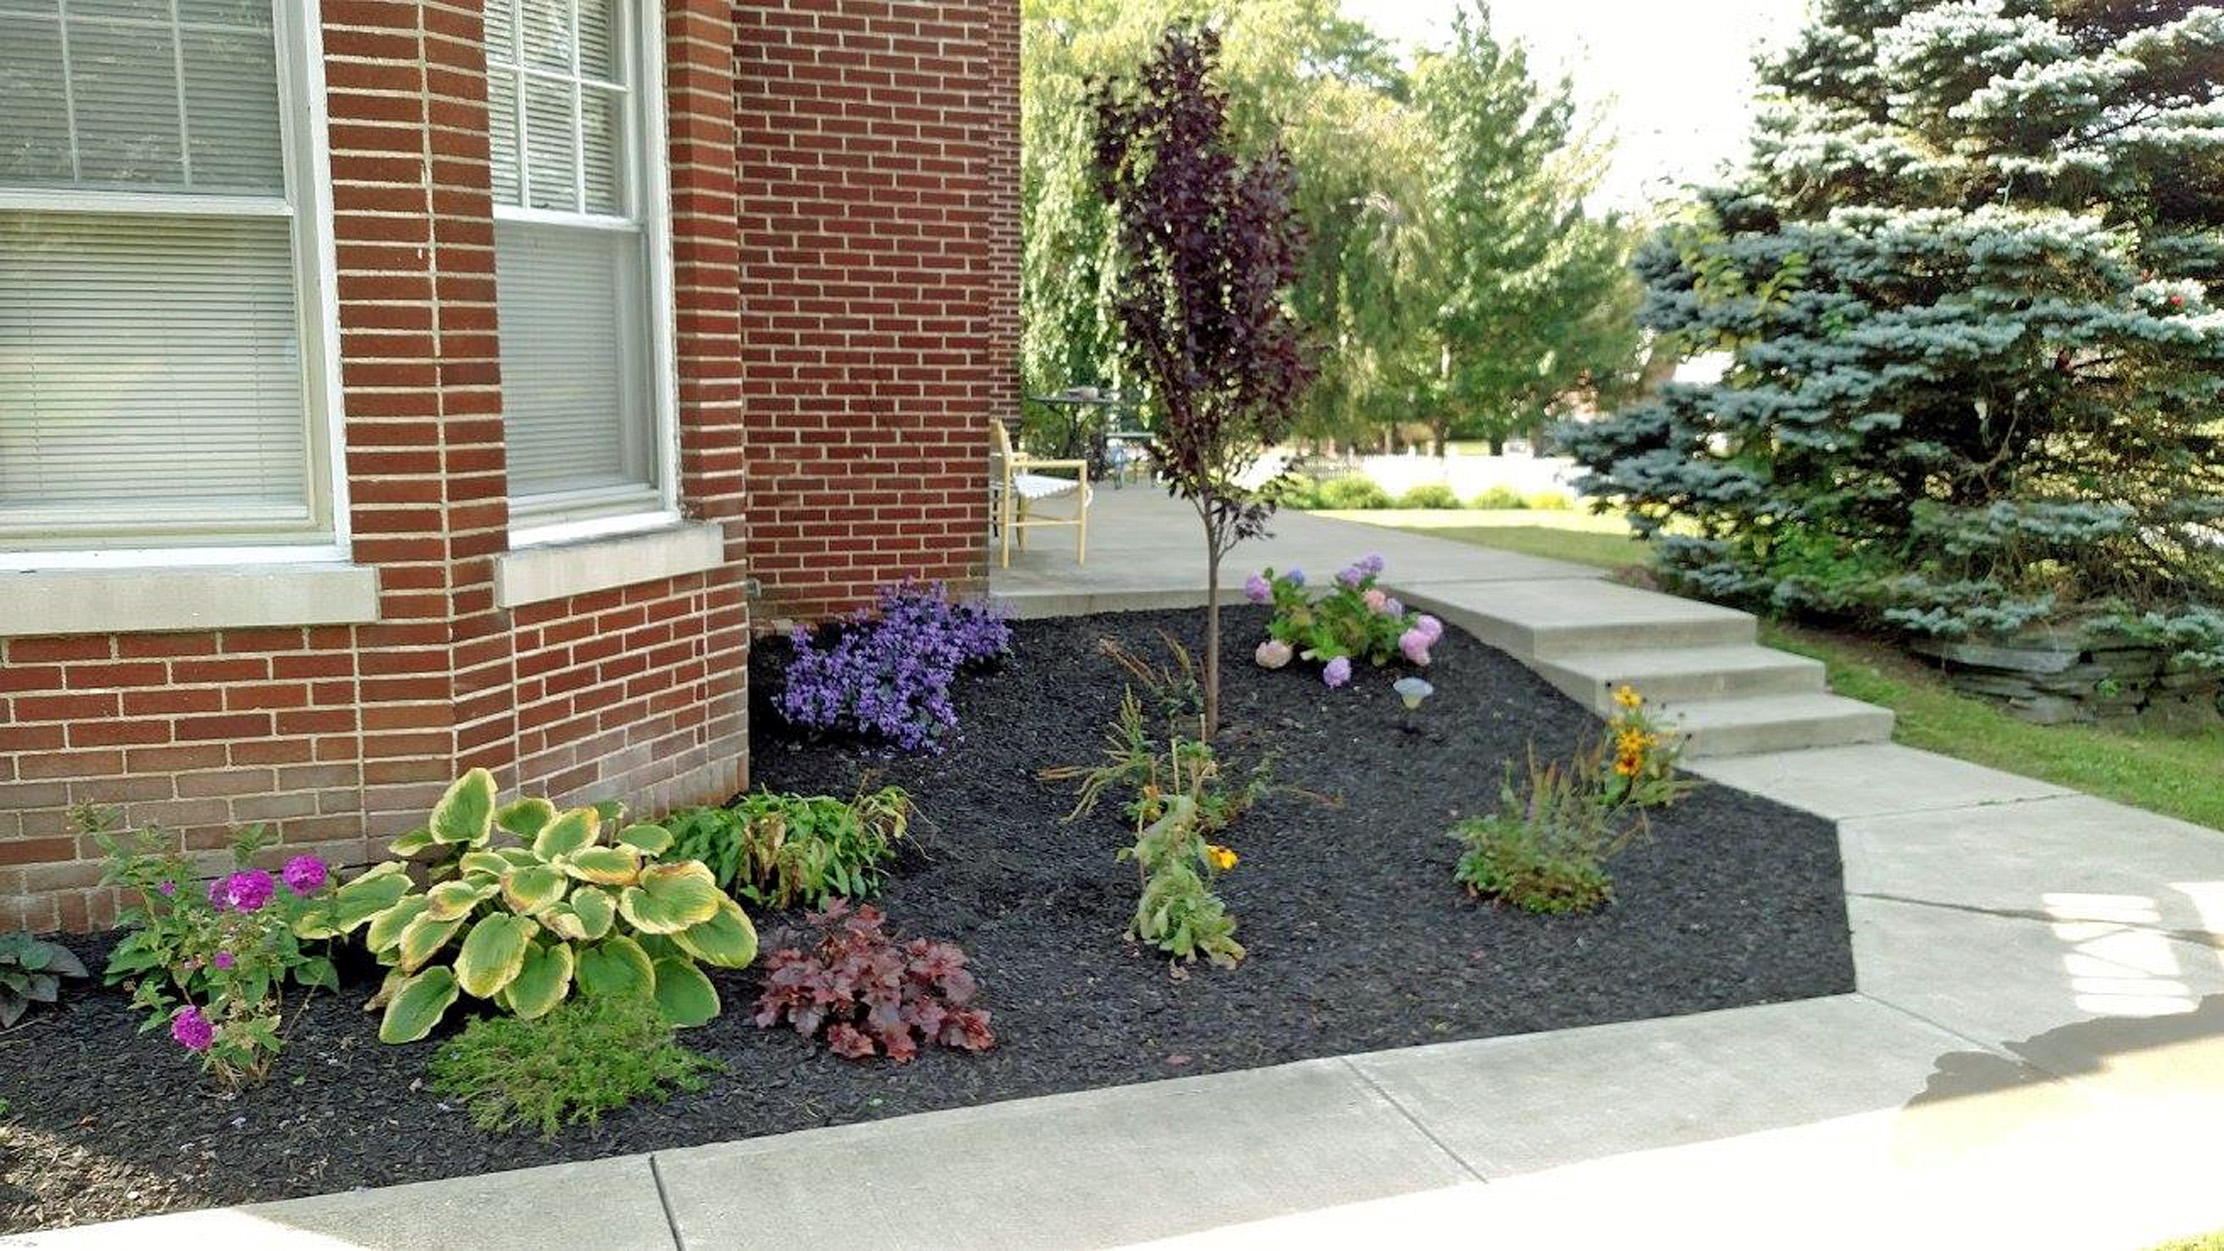 Thumbnail of completed plant bed with mulch